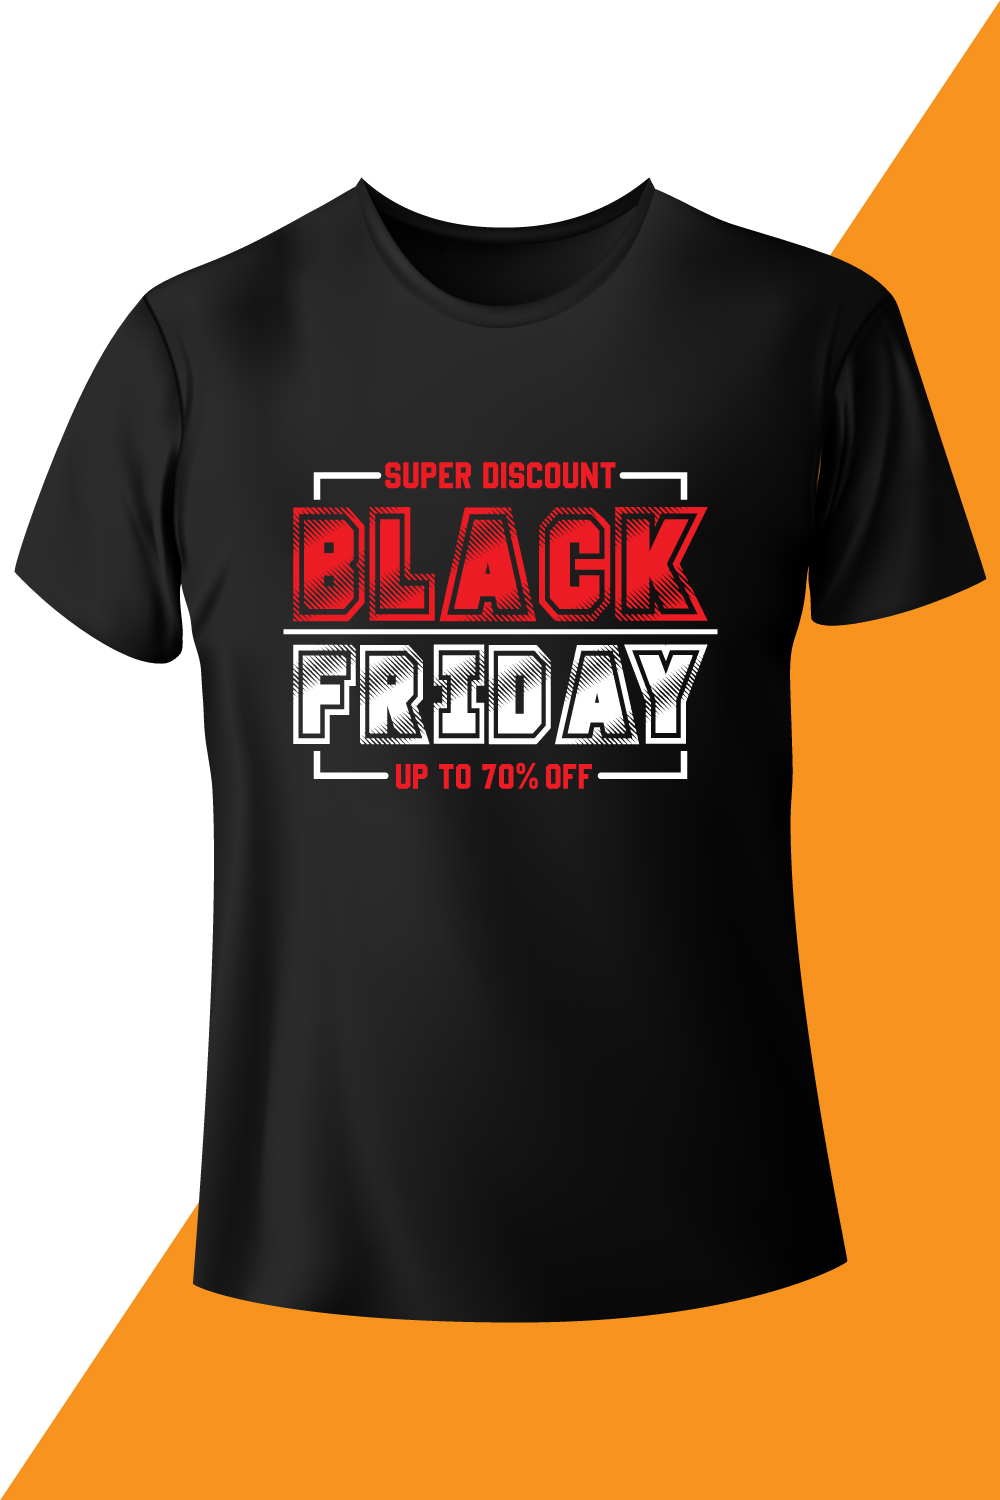 Image of a black t-shirt with a wonderful inscription Black Friday